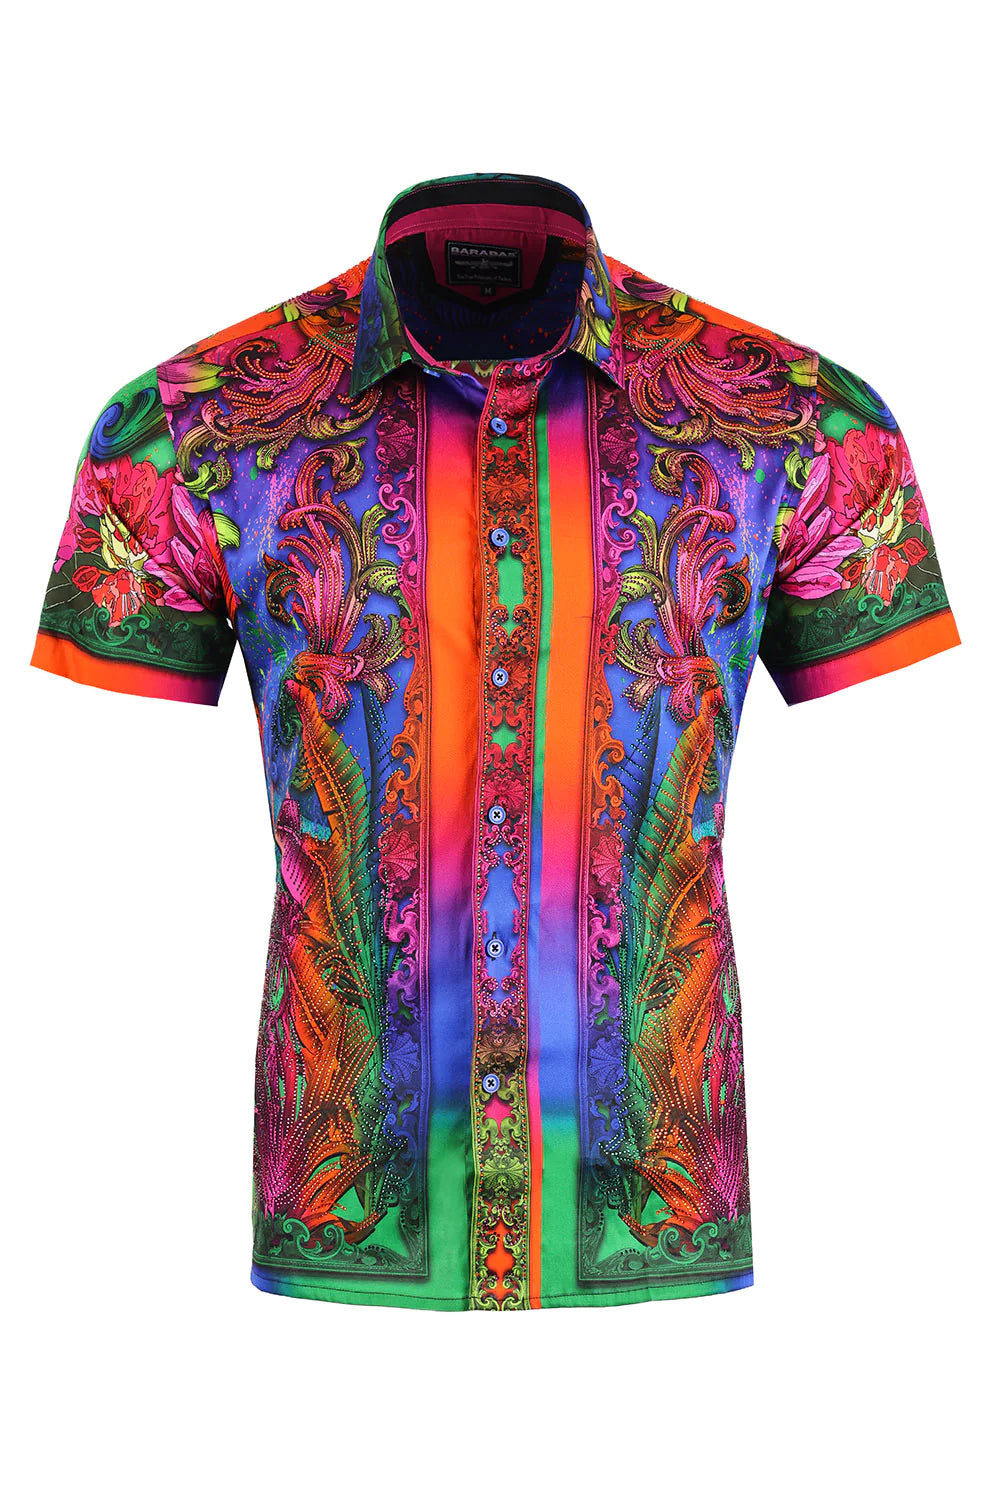 Barabas Tiger and Multi-Color Rhinestone Floral Short-Sleeve Button-Down Shirt SHIRTS Barabas Collection Vercini